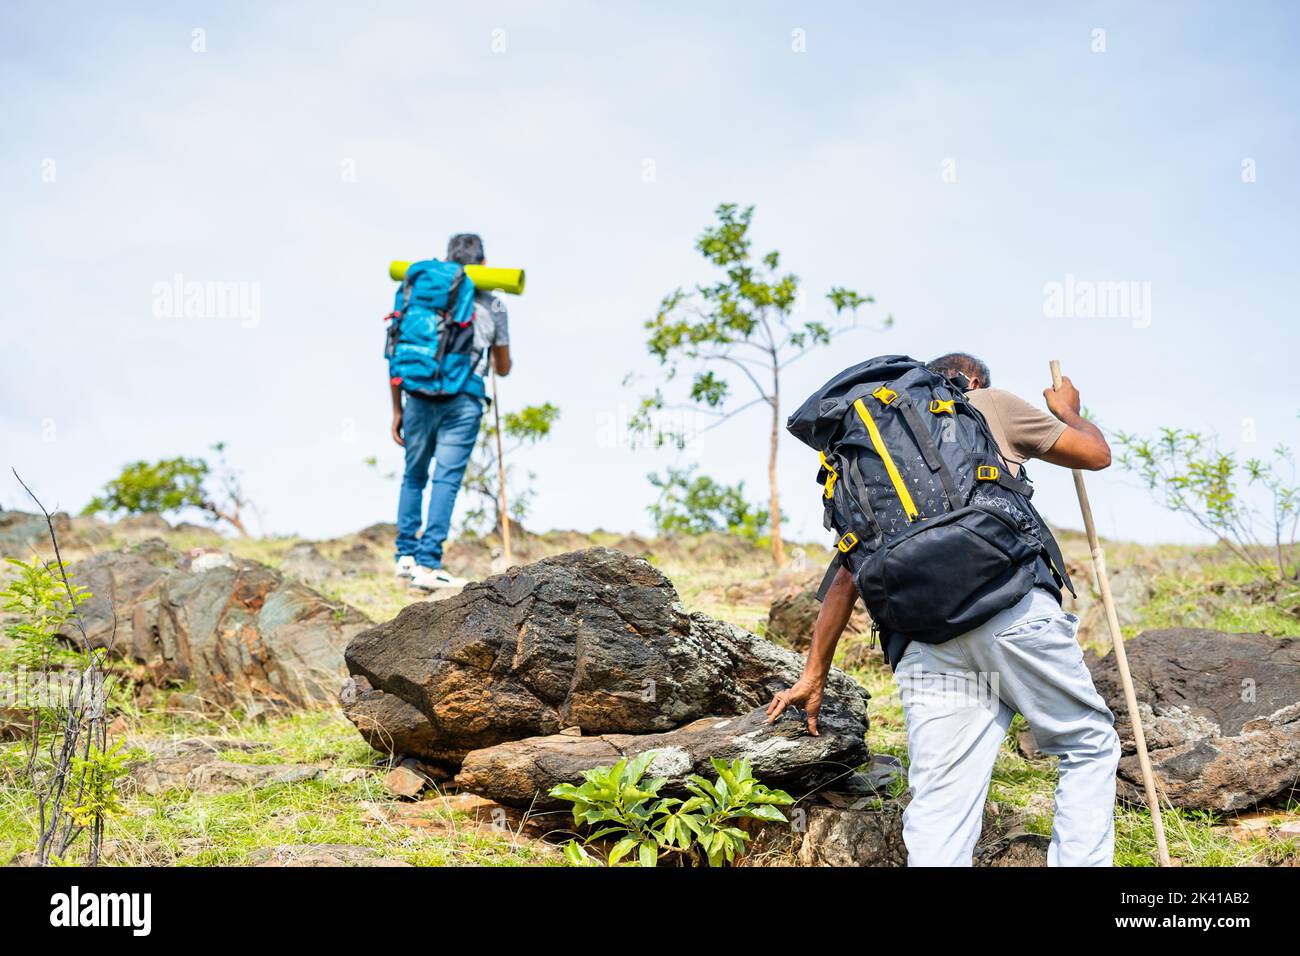 Back view tracking shot of middle aged hikers climbing hill or mountain - concept of adventure, leisure activities and trekking. Stock Photo